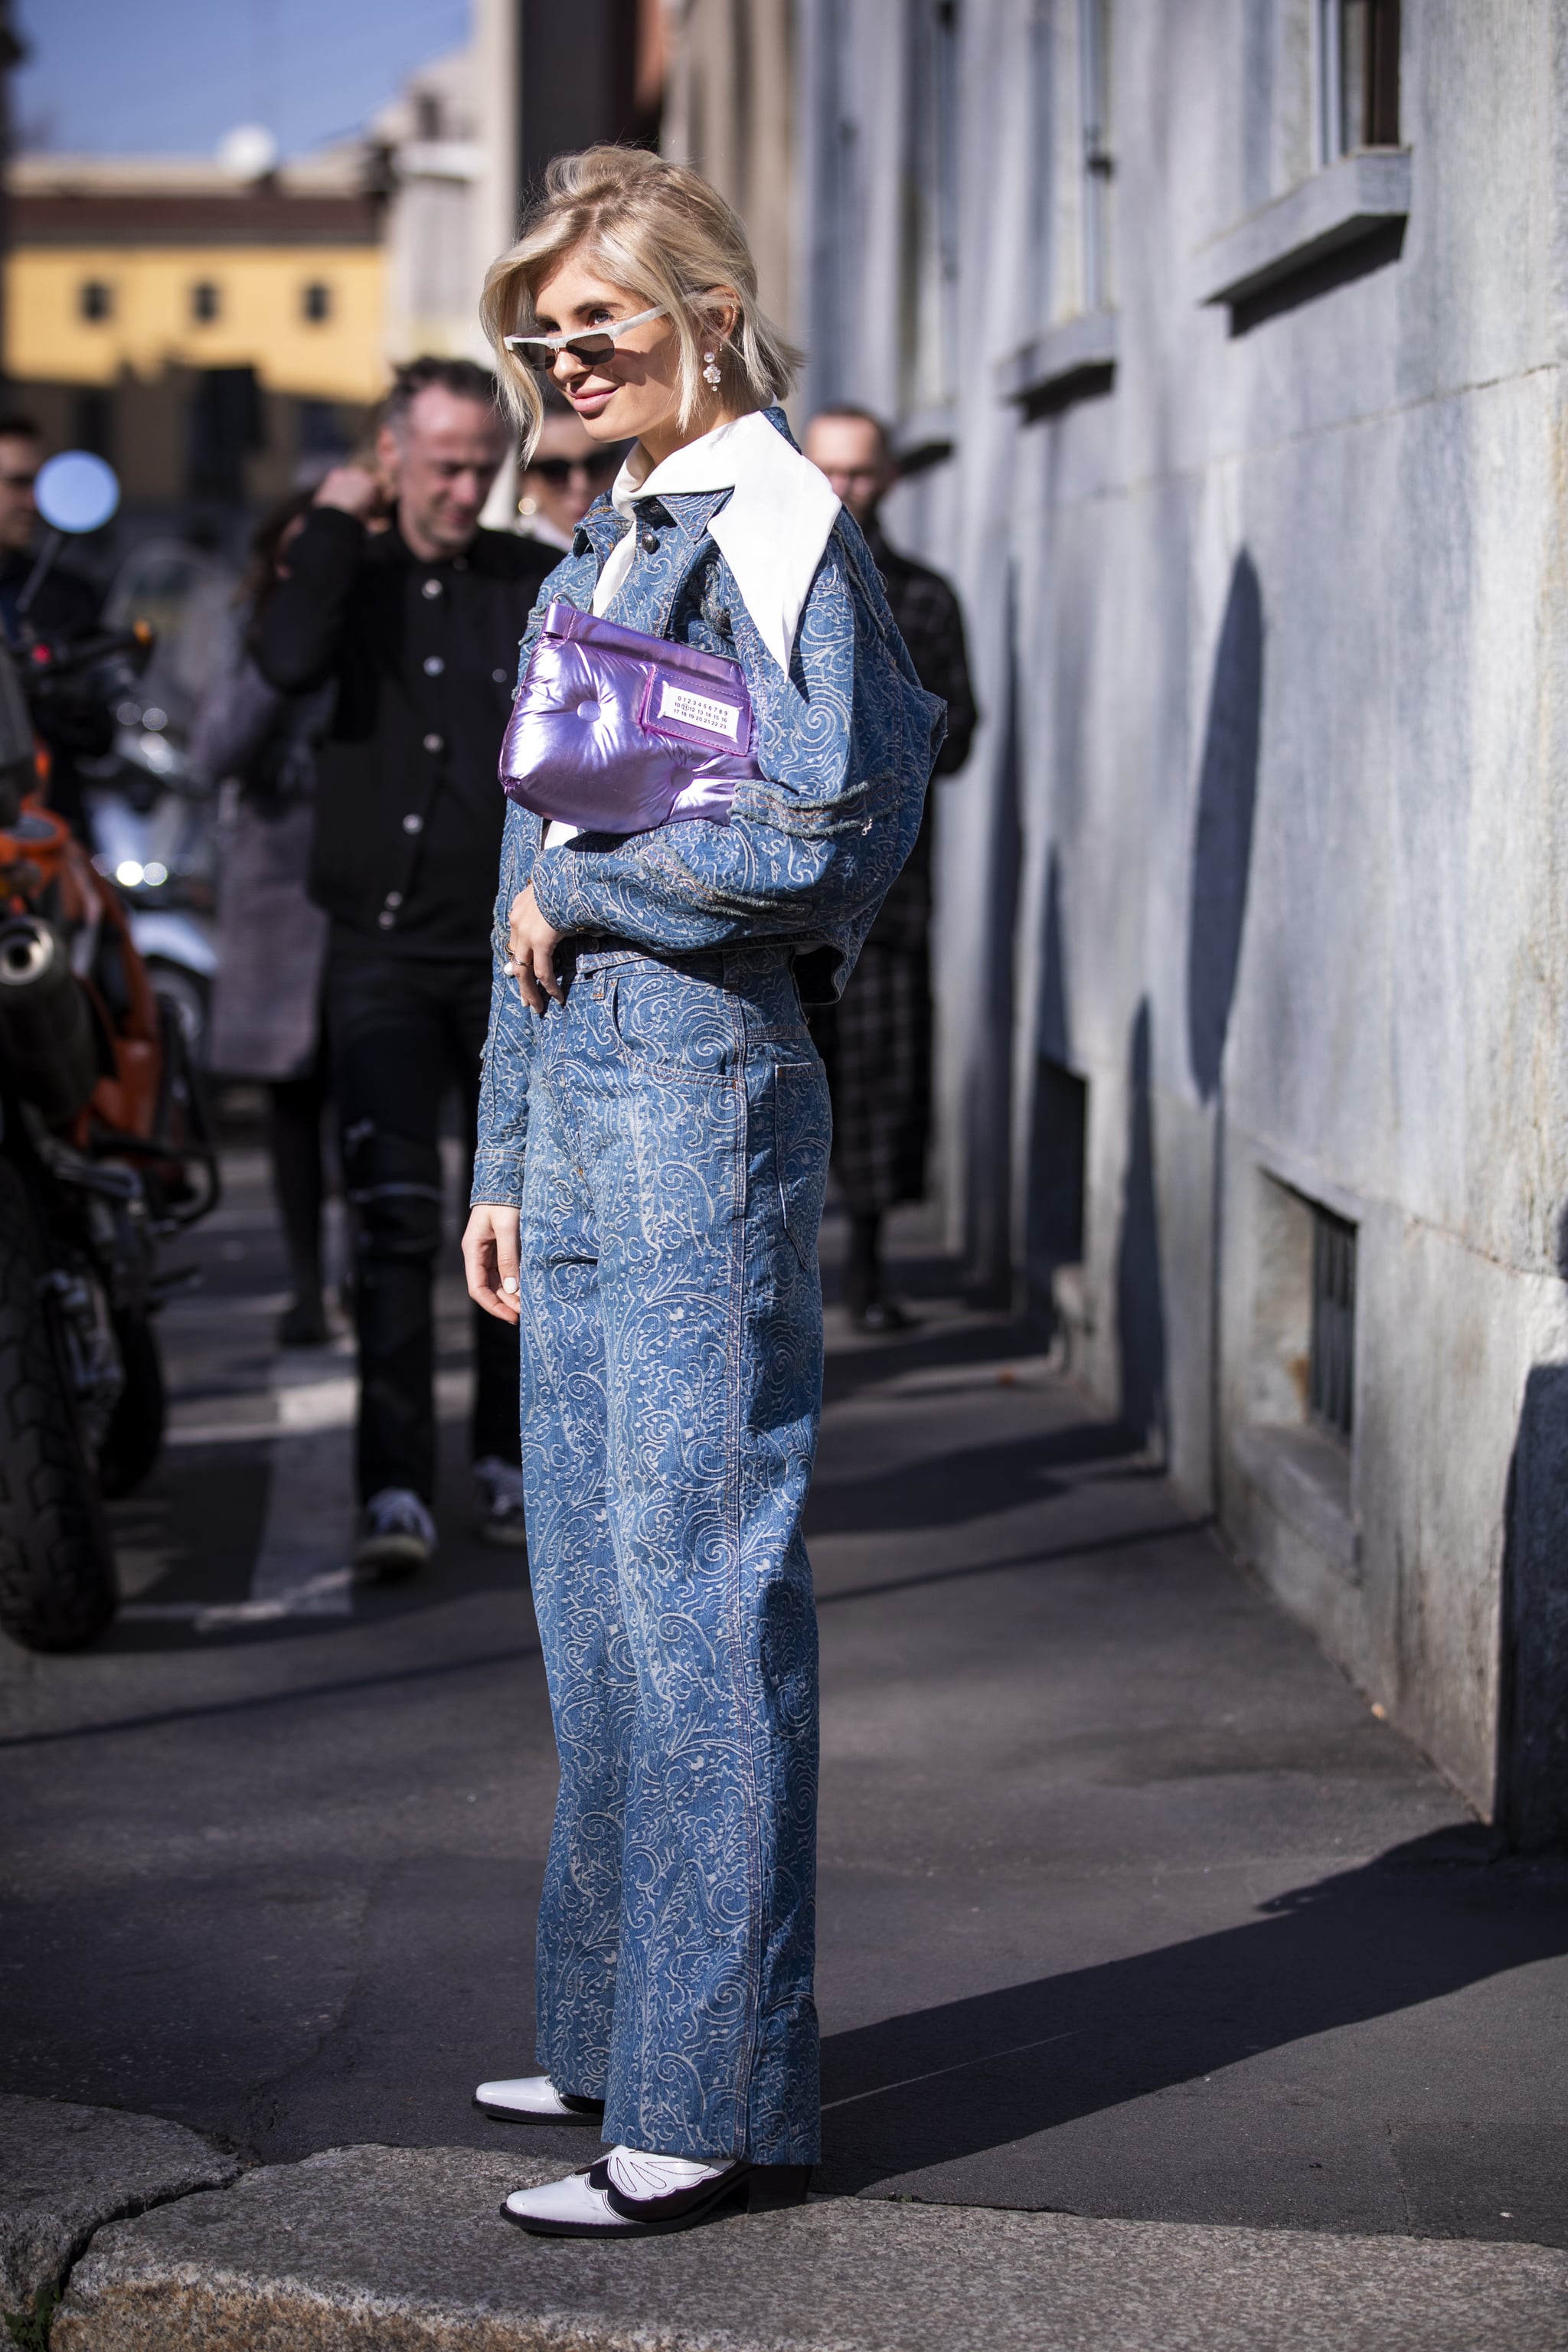 Denim Outfit: Check Out How to Look Like a Fashion Icon?